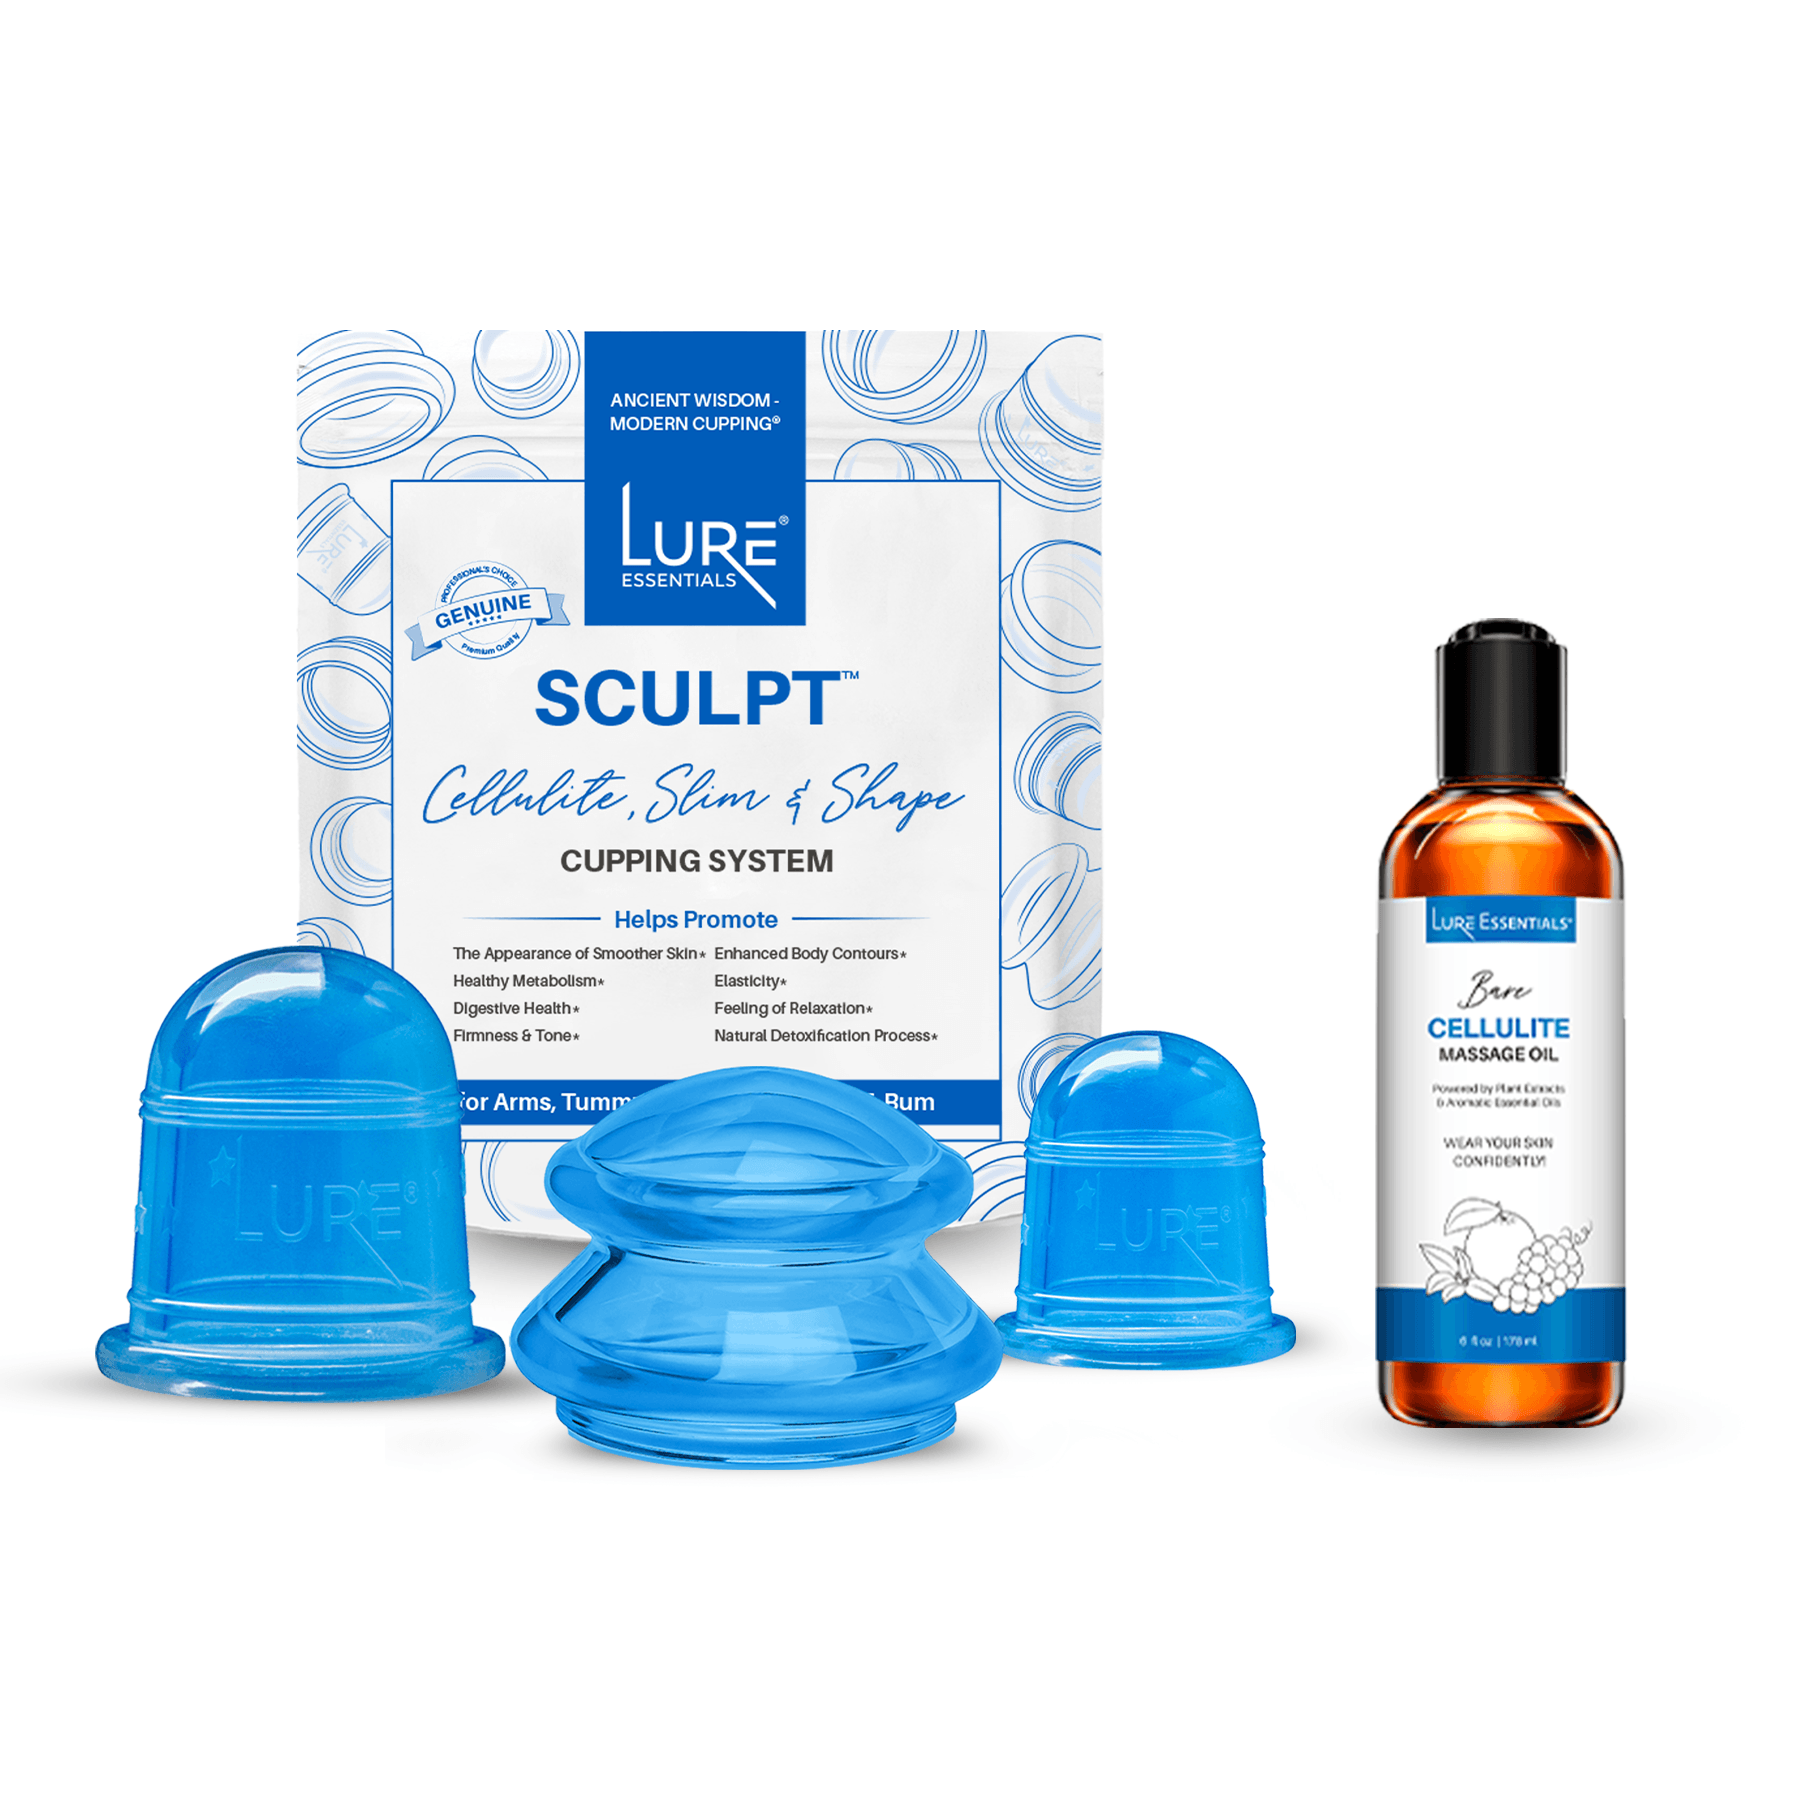  LURE Essentials Edge Cupping Therapy Set - Cupping Kit